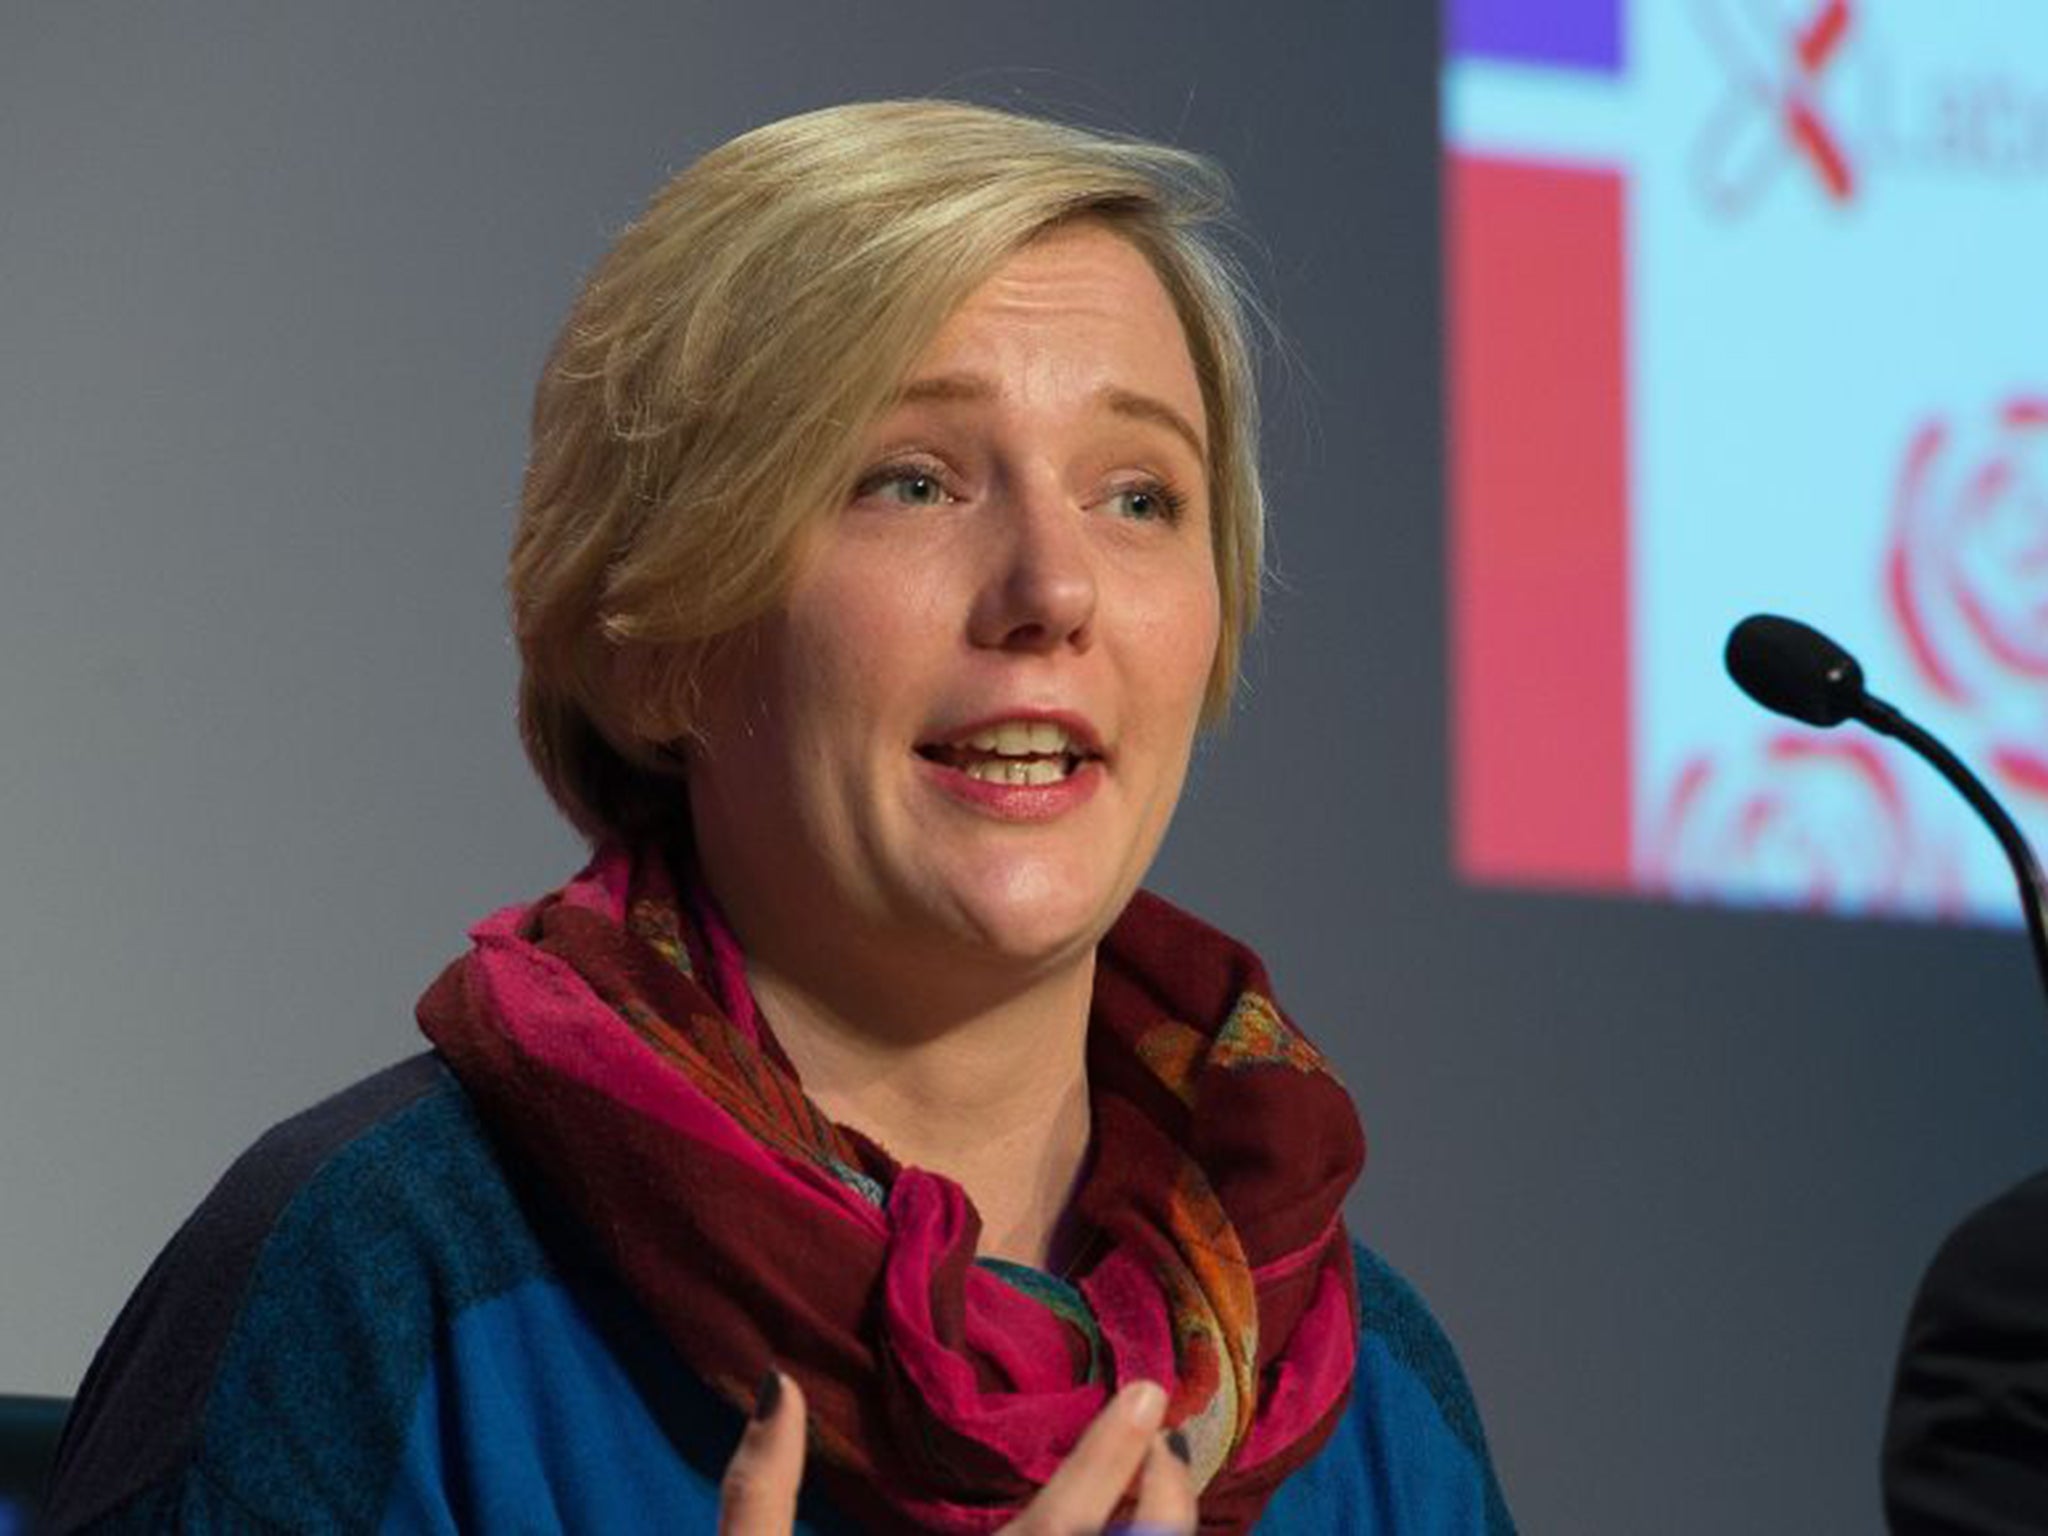 Stella Creasy came joint top on 29 per cent in a survey polling deputy leadership candidates